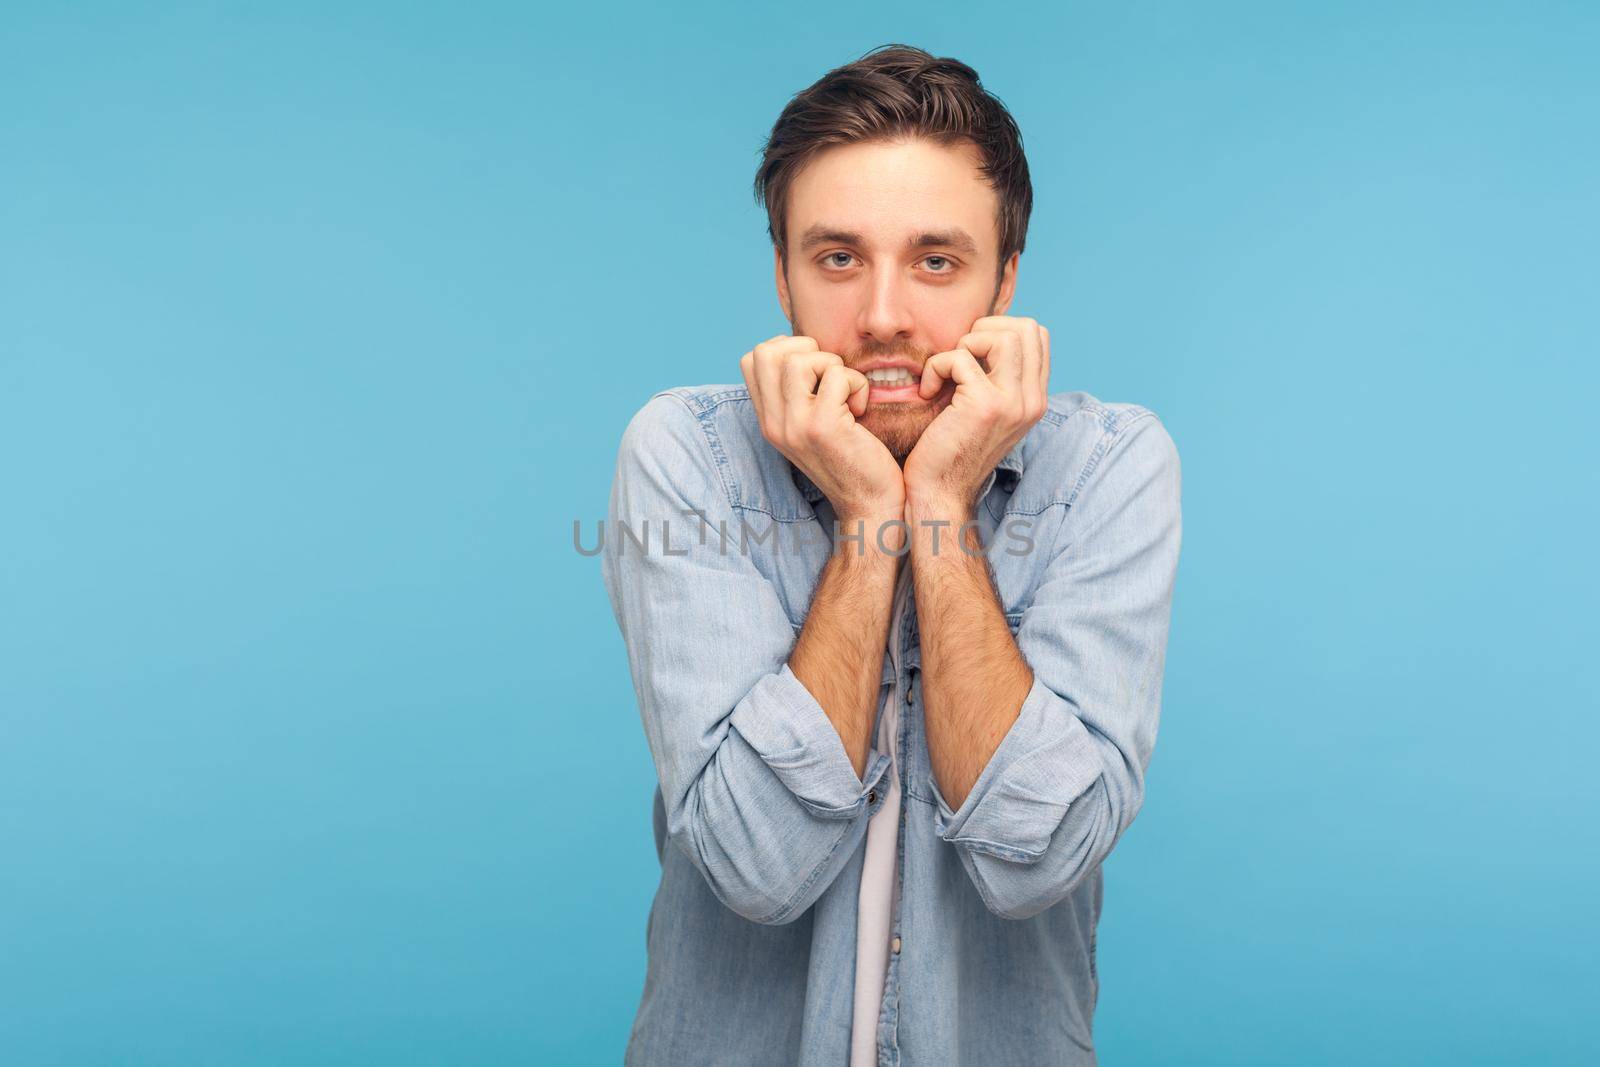 Anxiety disorder, depression. Portrait of stressed out, worried man in worker denim shirt biting nails, nervous about troubles, panicking and looking scared. studio shot isolated on blue background